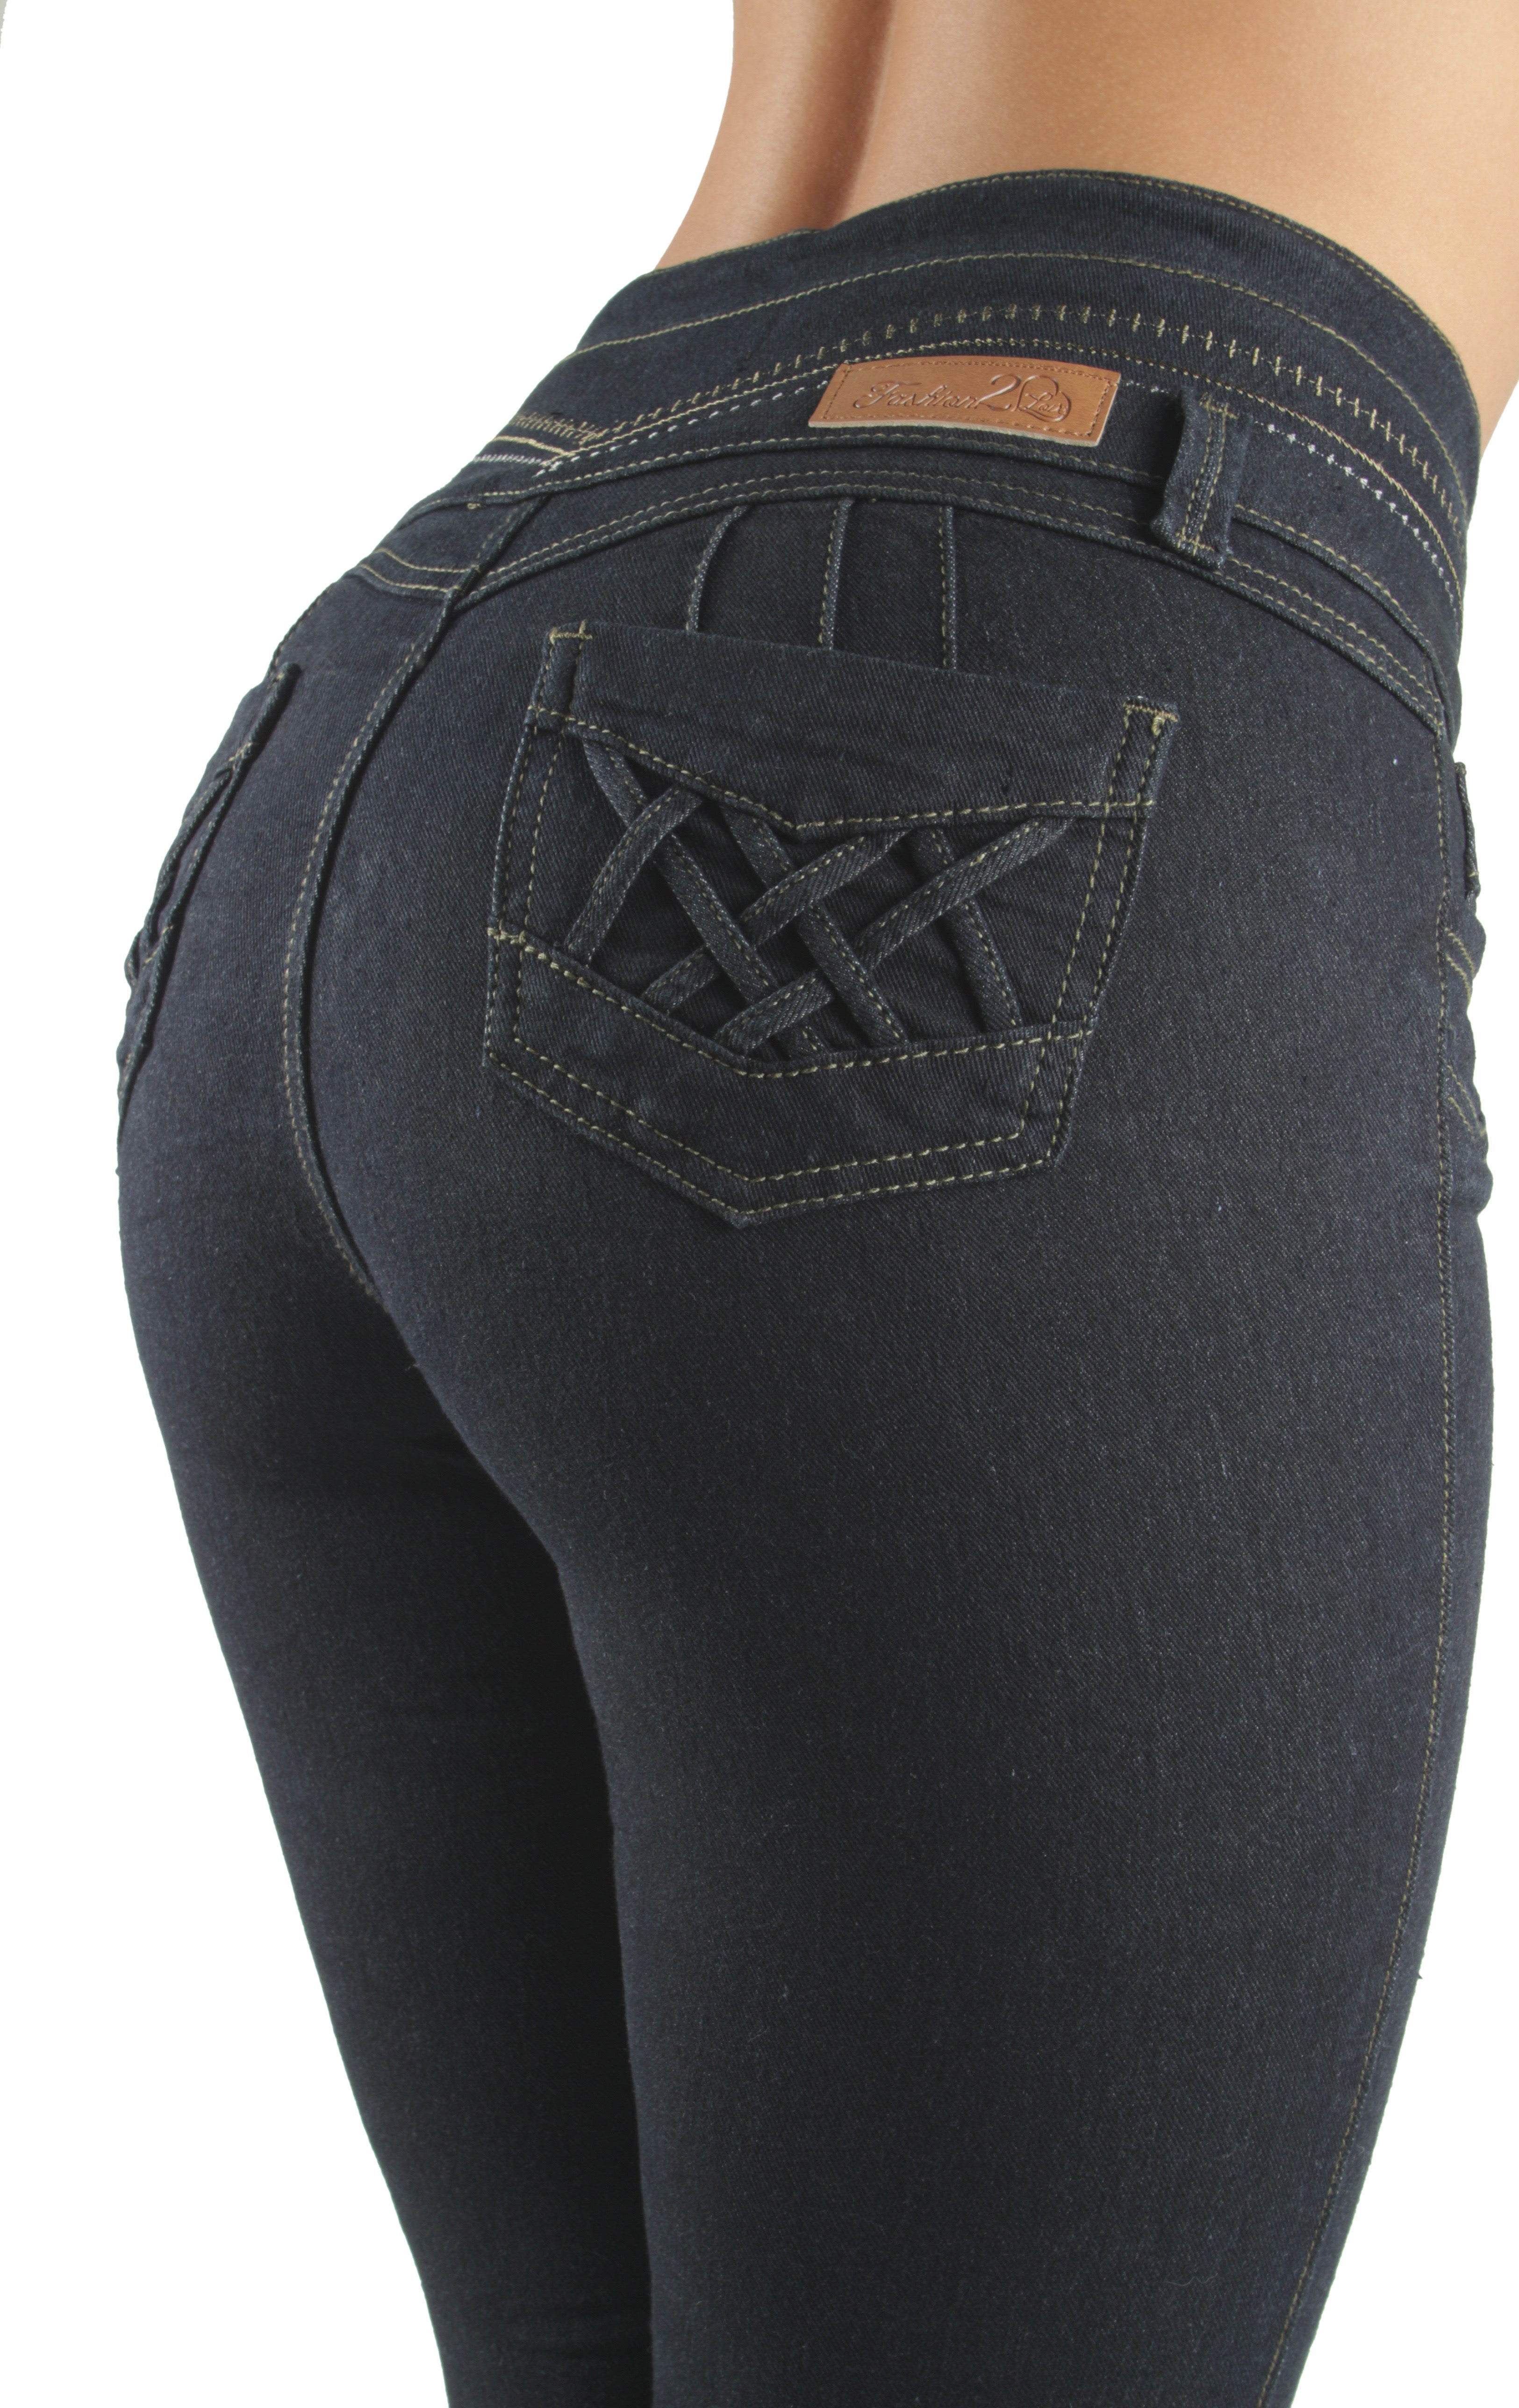 SHAPE CONCEPT Jeans Colombianos Levanta cola Colombian Butt Lifting Jeans